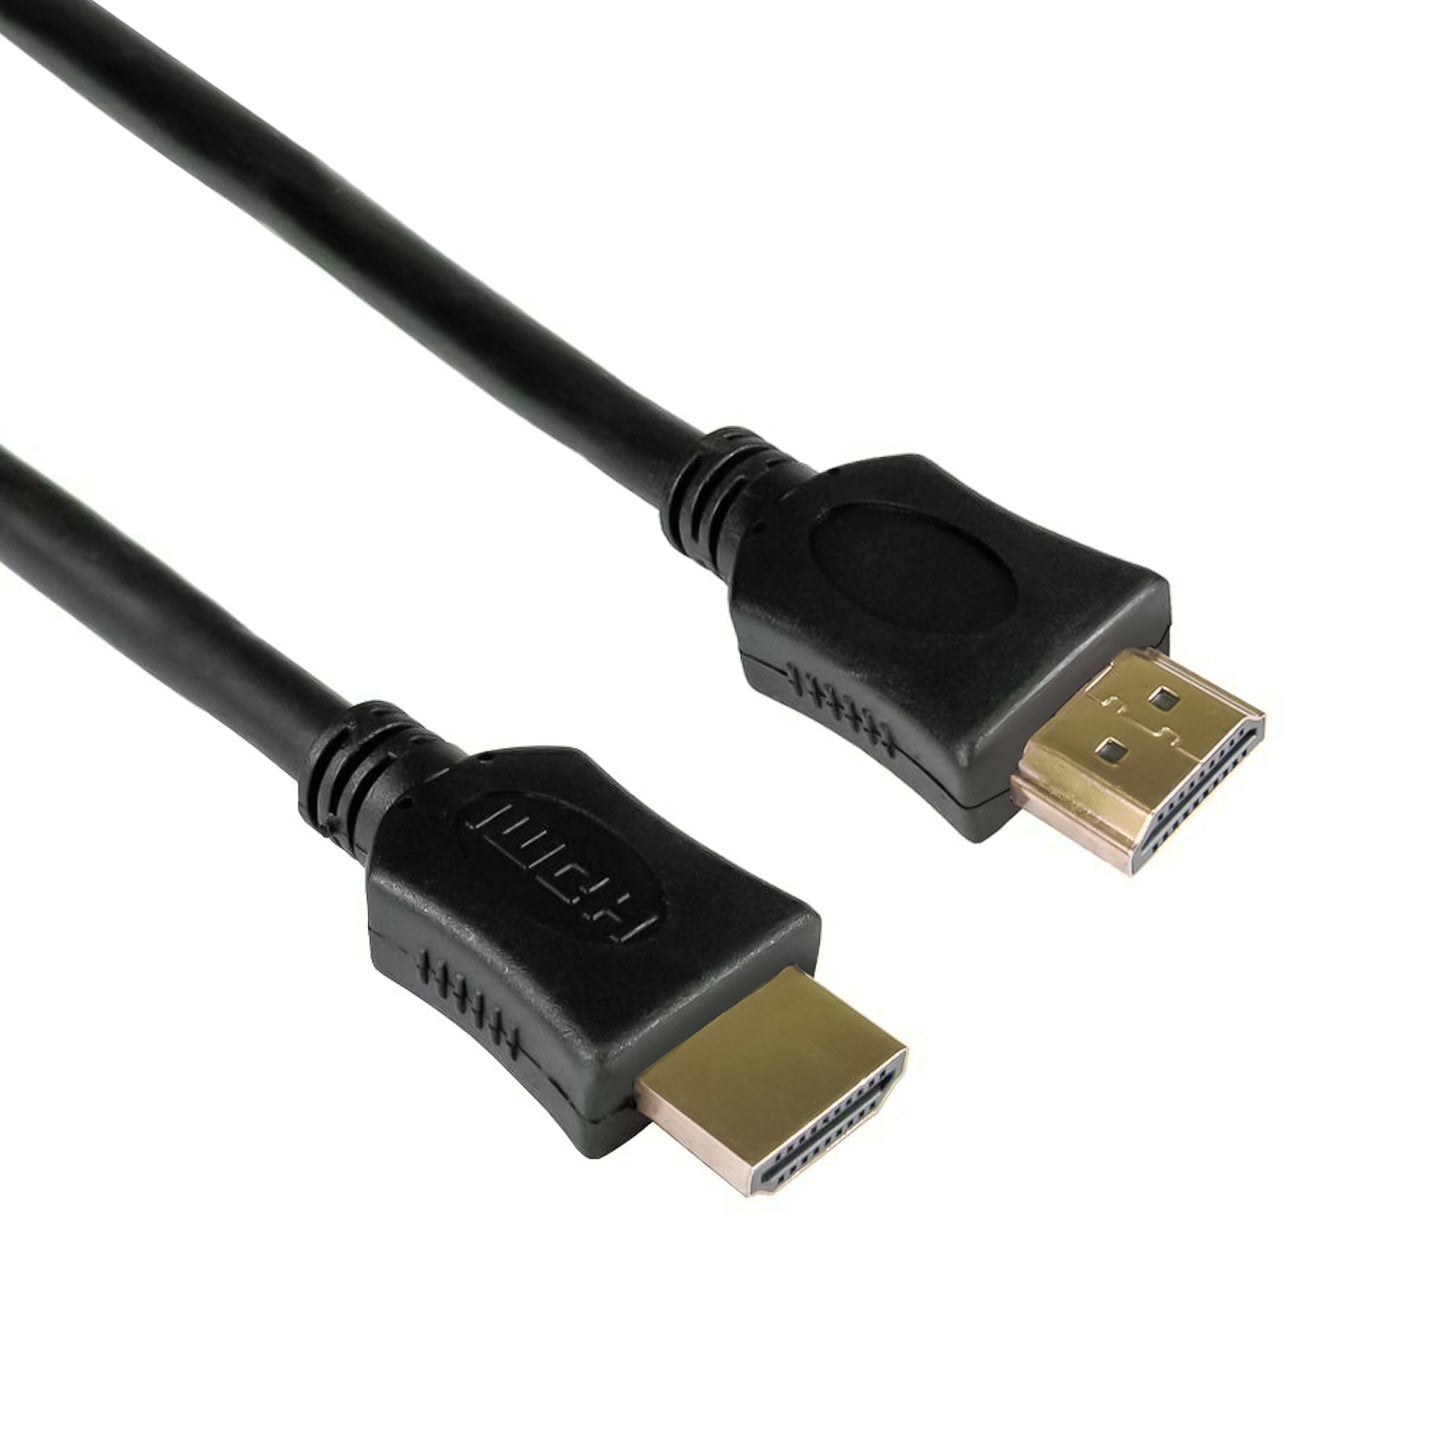 GBC 0.5 meter HDMI cable, supports 4K UHD at 60Hz, high speed 18 Gbps with ethernet, gold-plated connectors